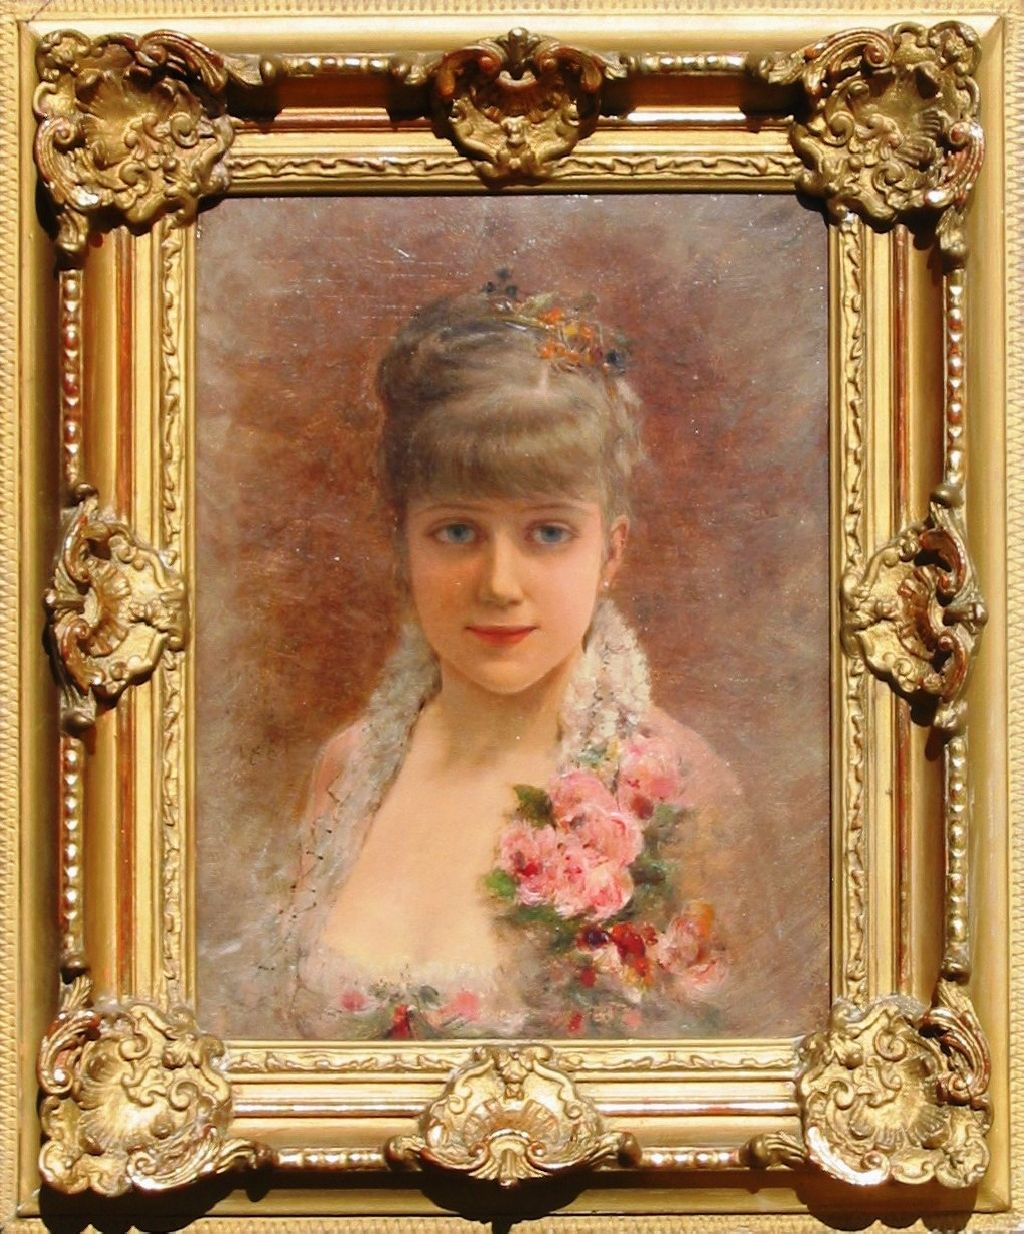 Woman with a Rose - 1881 - Oil on Canvas - Stephen M. Foster Fine Arts Gallery, Washington, DC